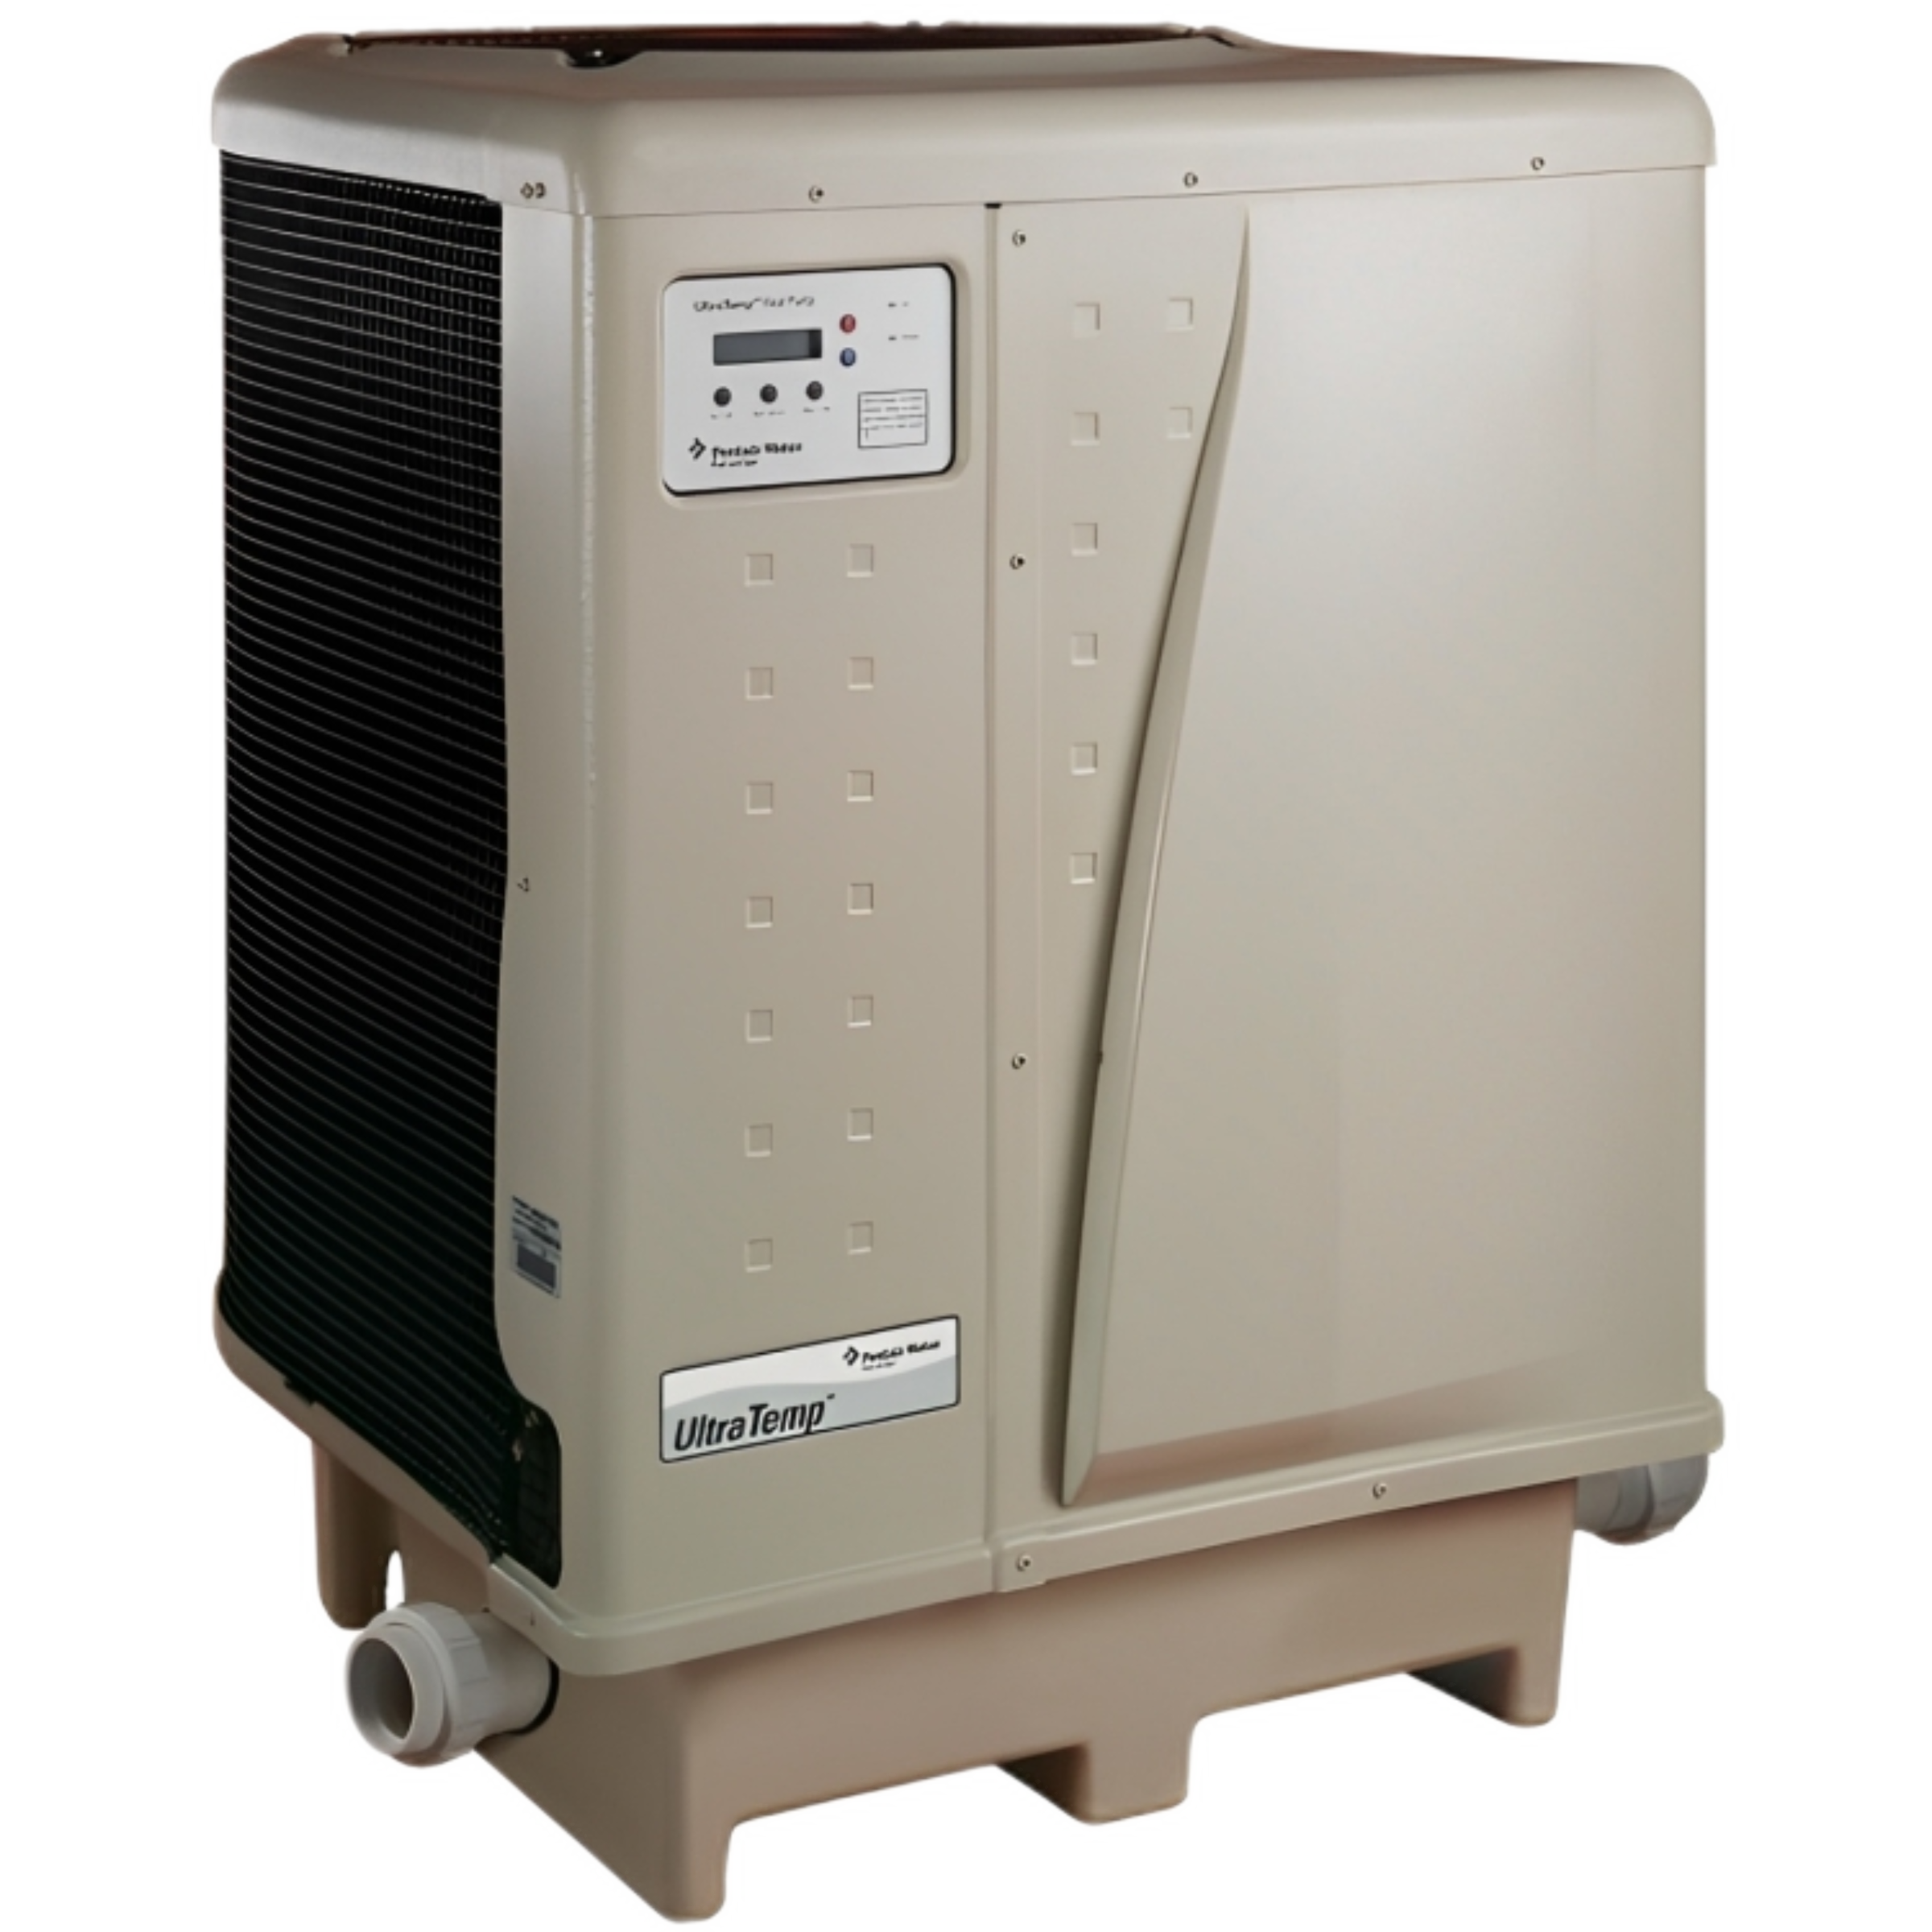 460931 PENTAIR UltraTemp 90 High Performance Pool Heat Pump, Color: Almond, 
SIMPLY THE MOST ECONOMICAL WAY TO HEAT POOLS AND SPAS